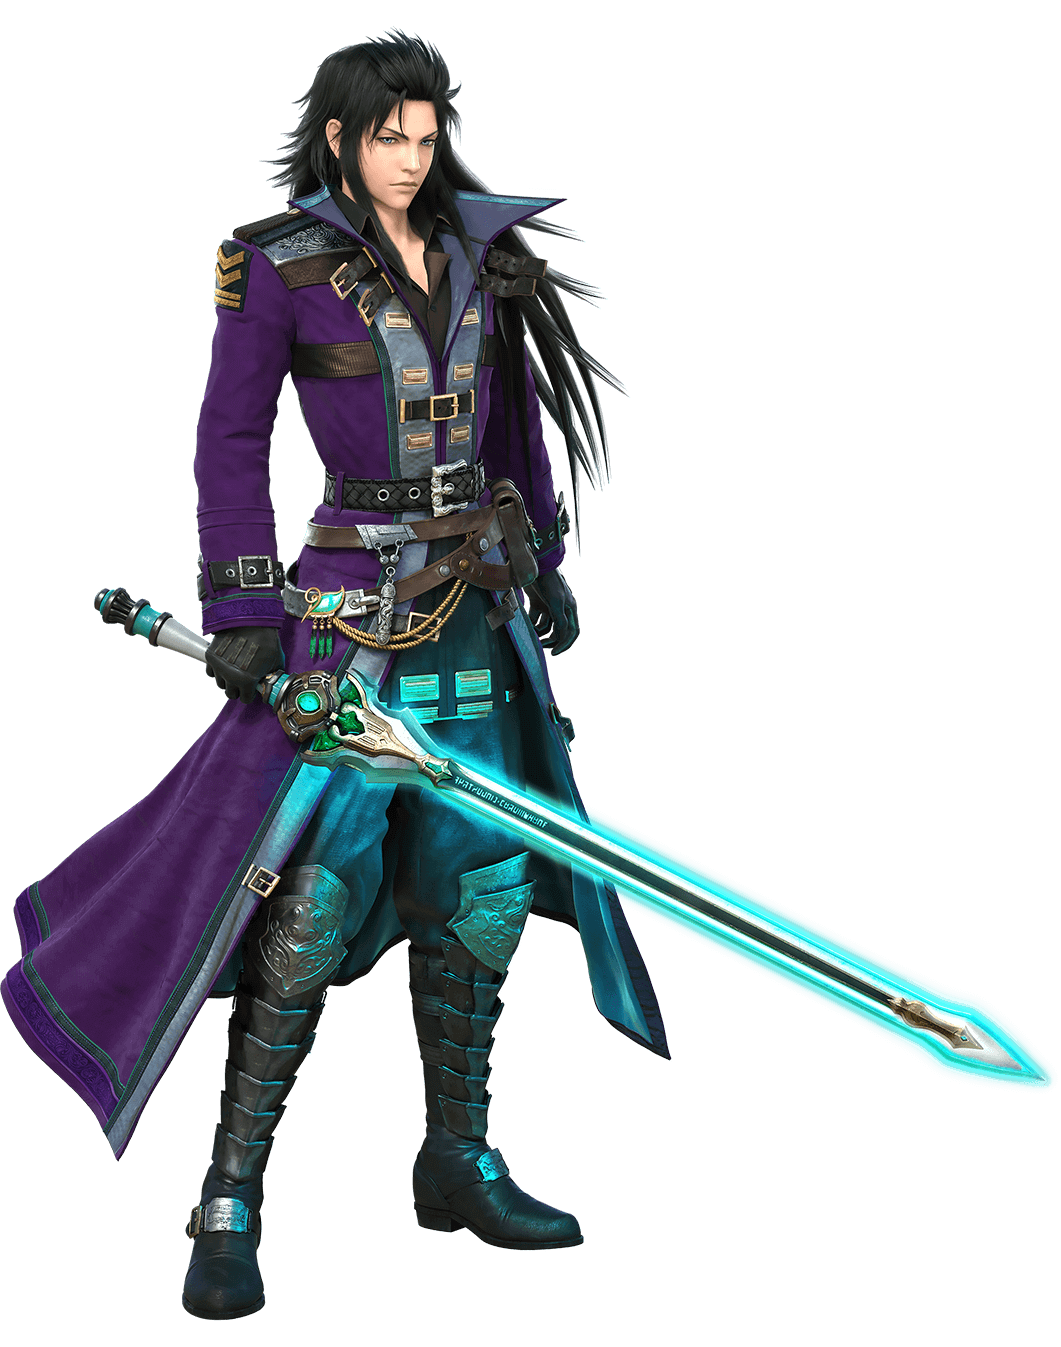 https://vignette.wikia.nocookie.net/finalfantasy/images/d/d7/FFBE_-_Lasswell_-_Full_body_render.png/revision/latest?cb=20160930021006